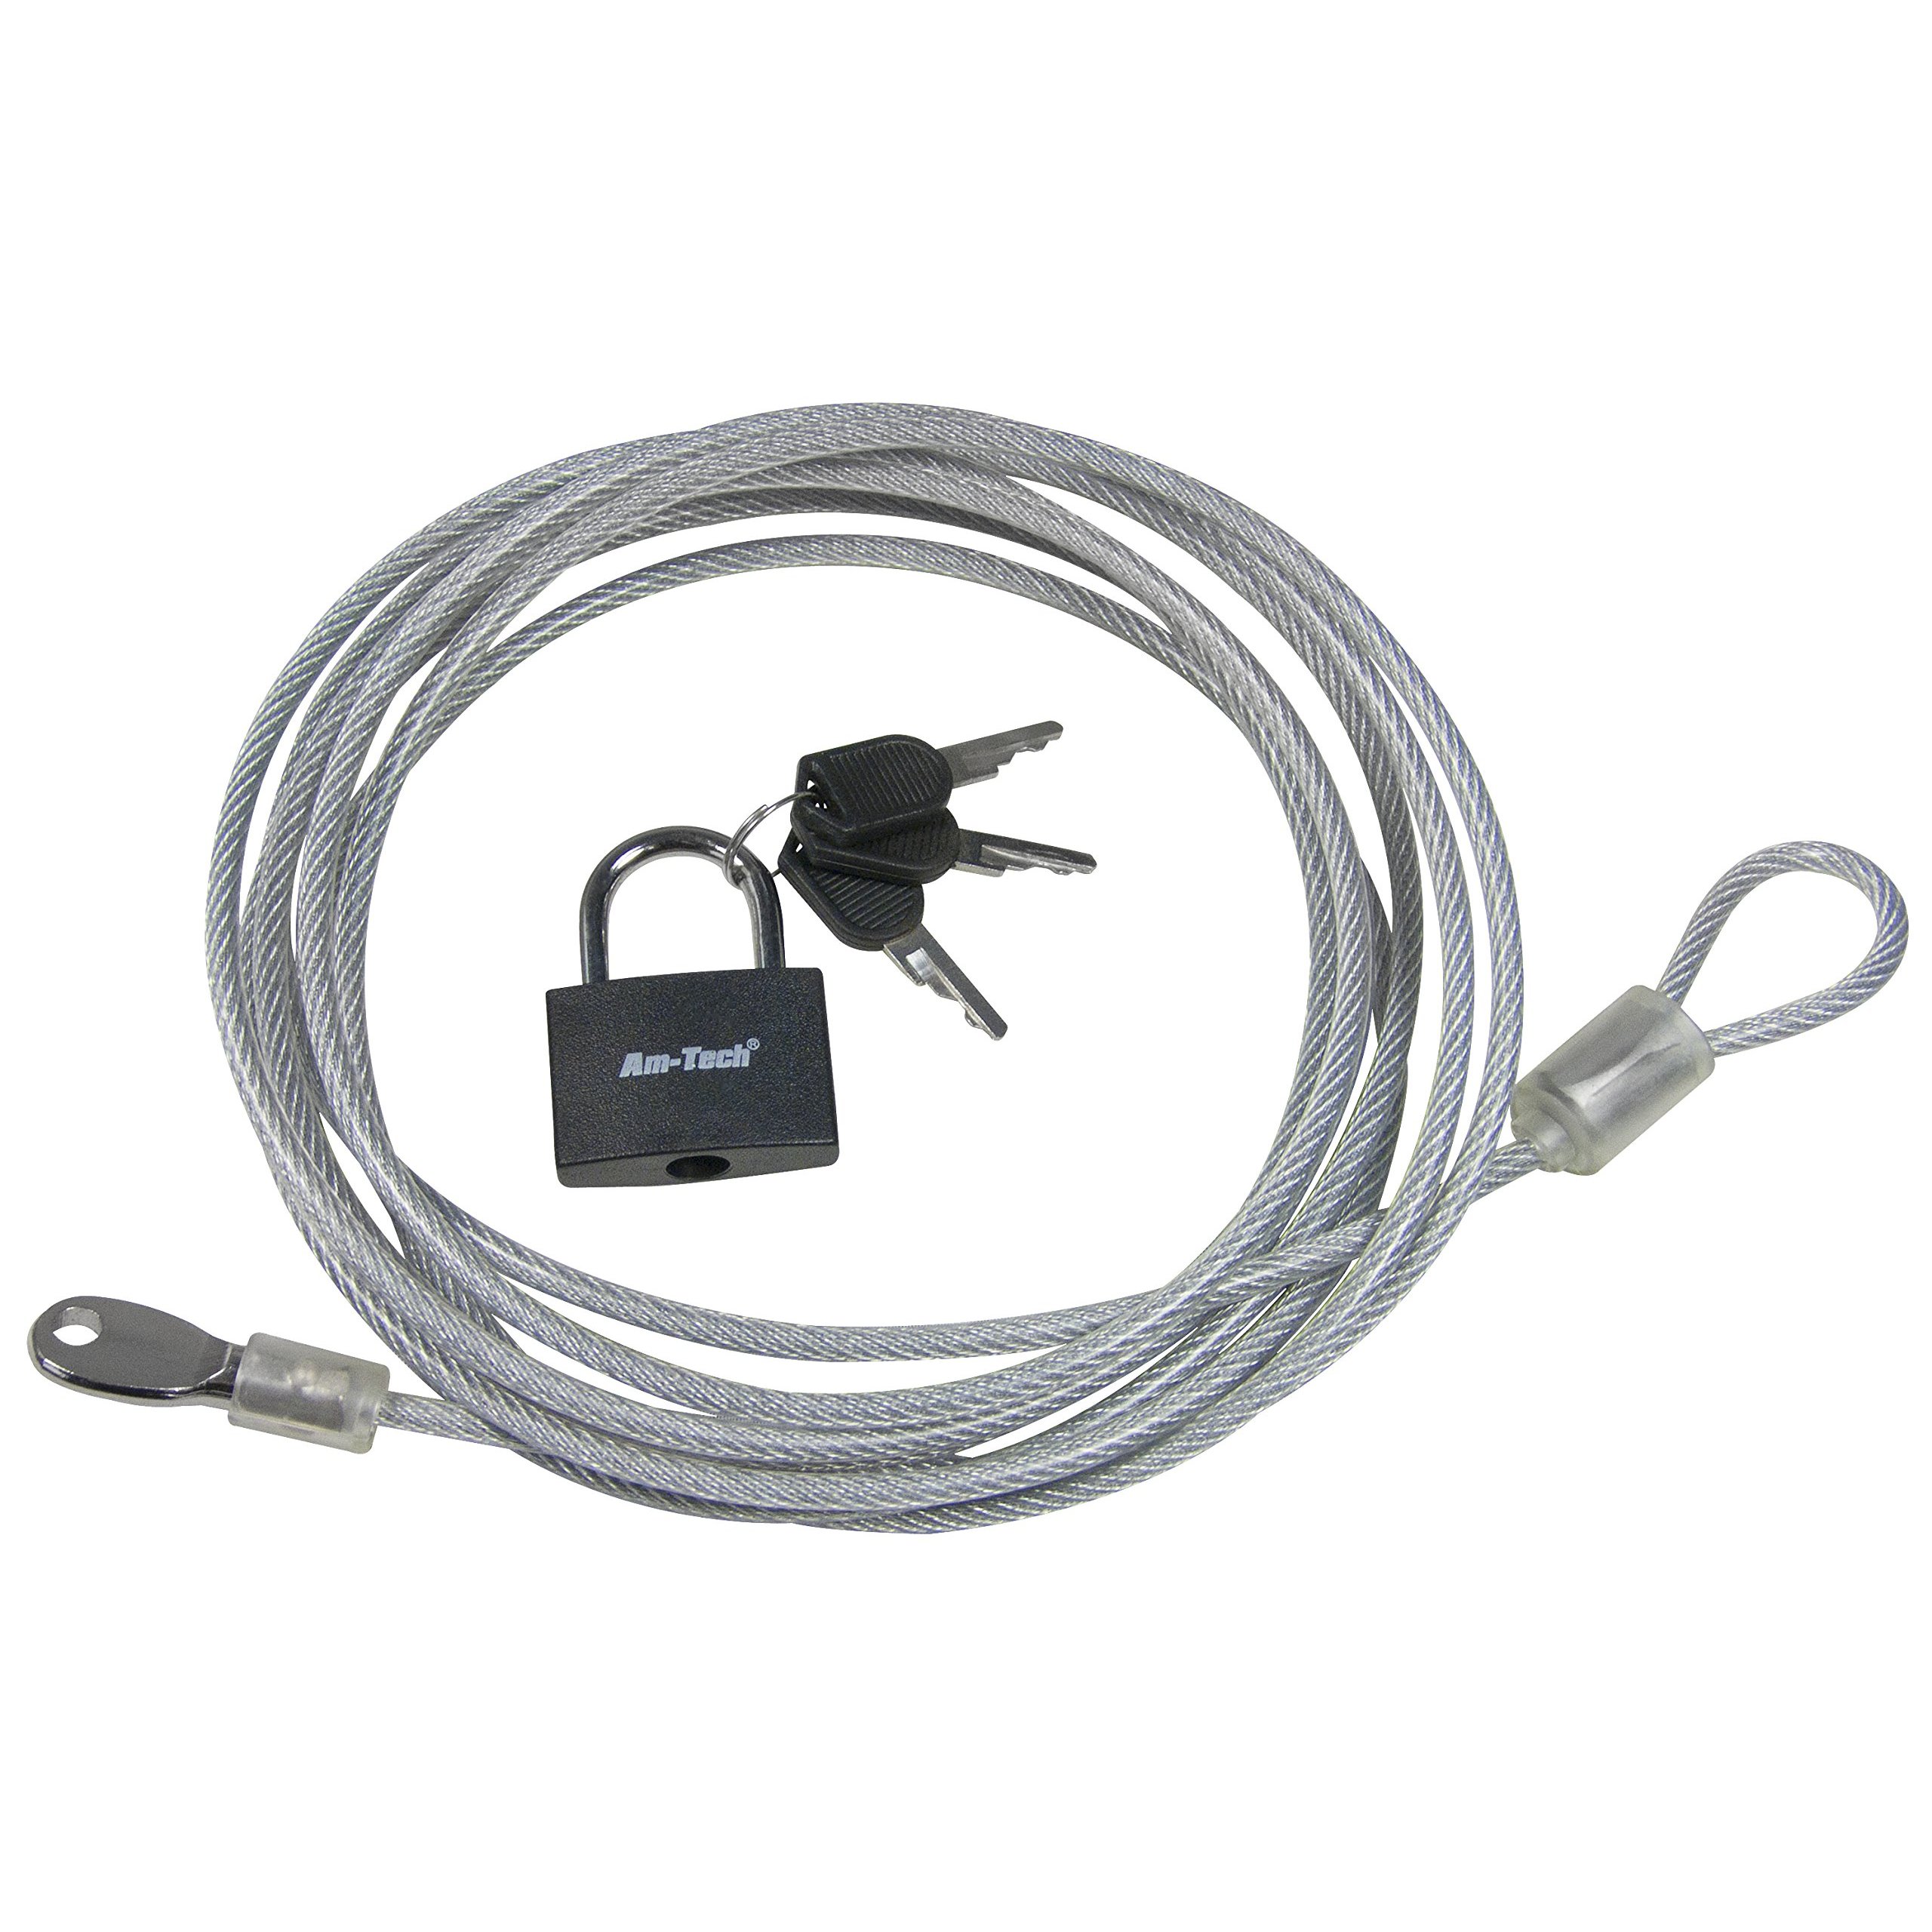 Amtech T1695 Security Cable and Padlock, 3 m x 4 mm